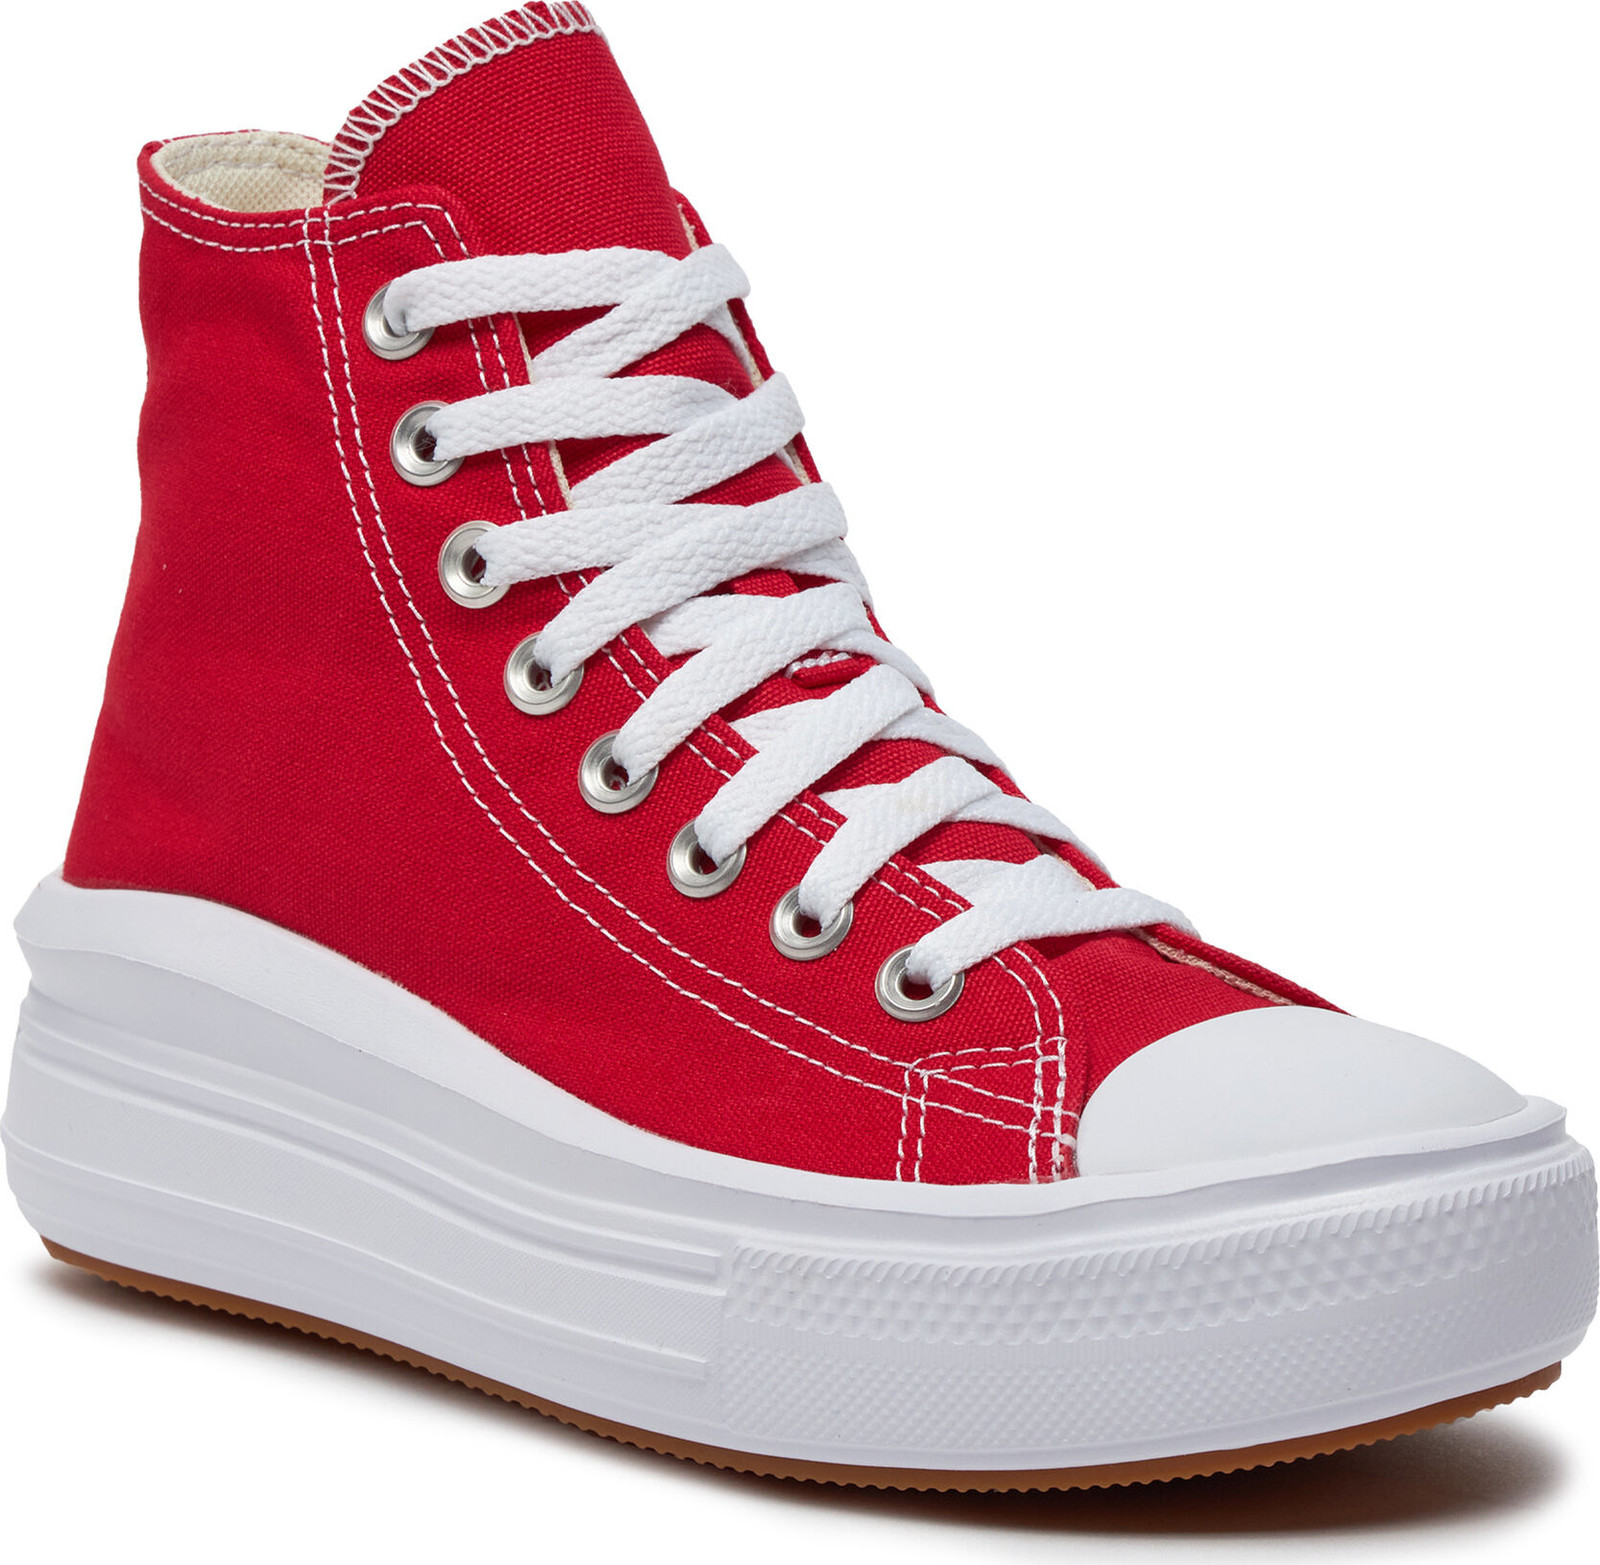 Plátěnky Converse Chuck Taylor All Star Move A09073C Red/White/Gum